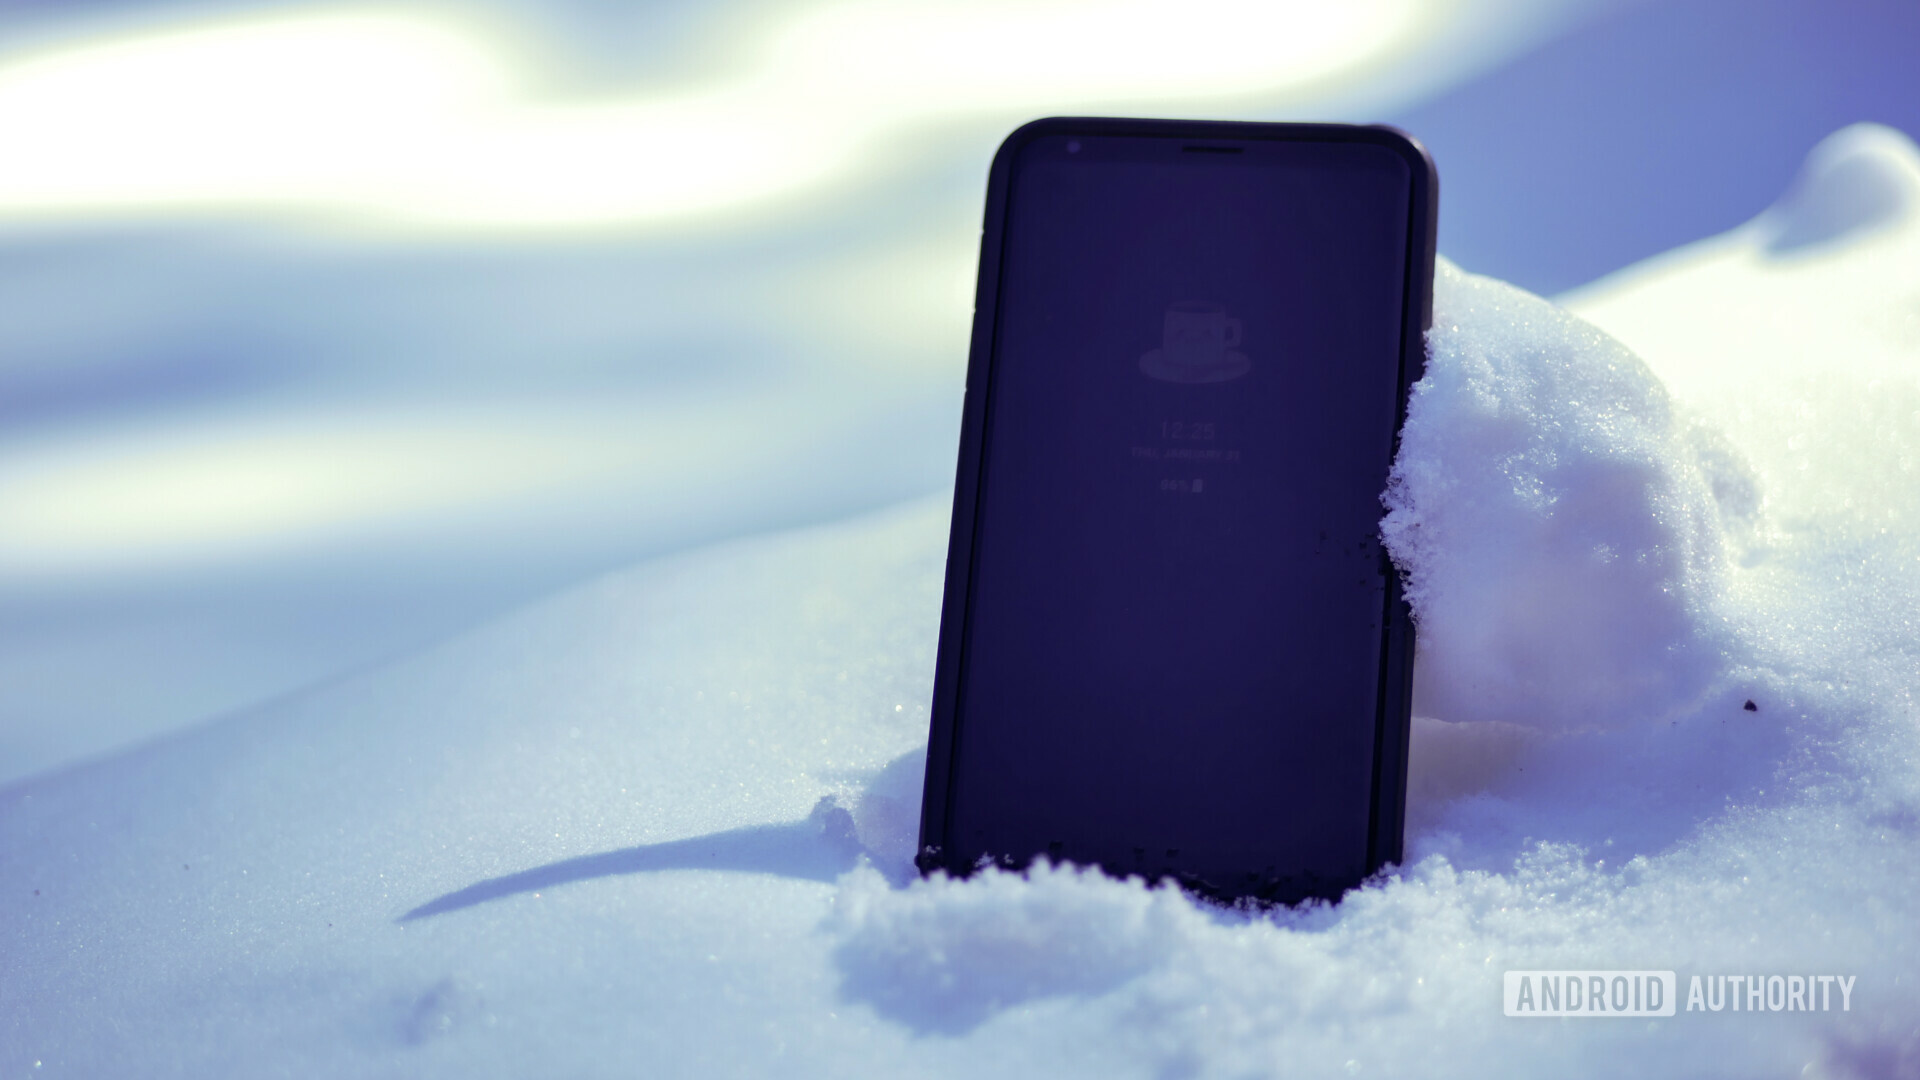 A cold phone half-buried in some white snow.